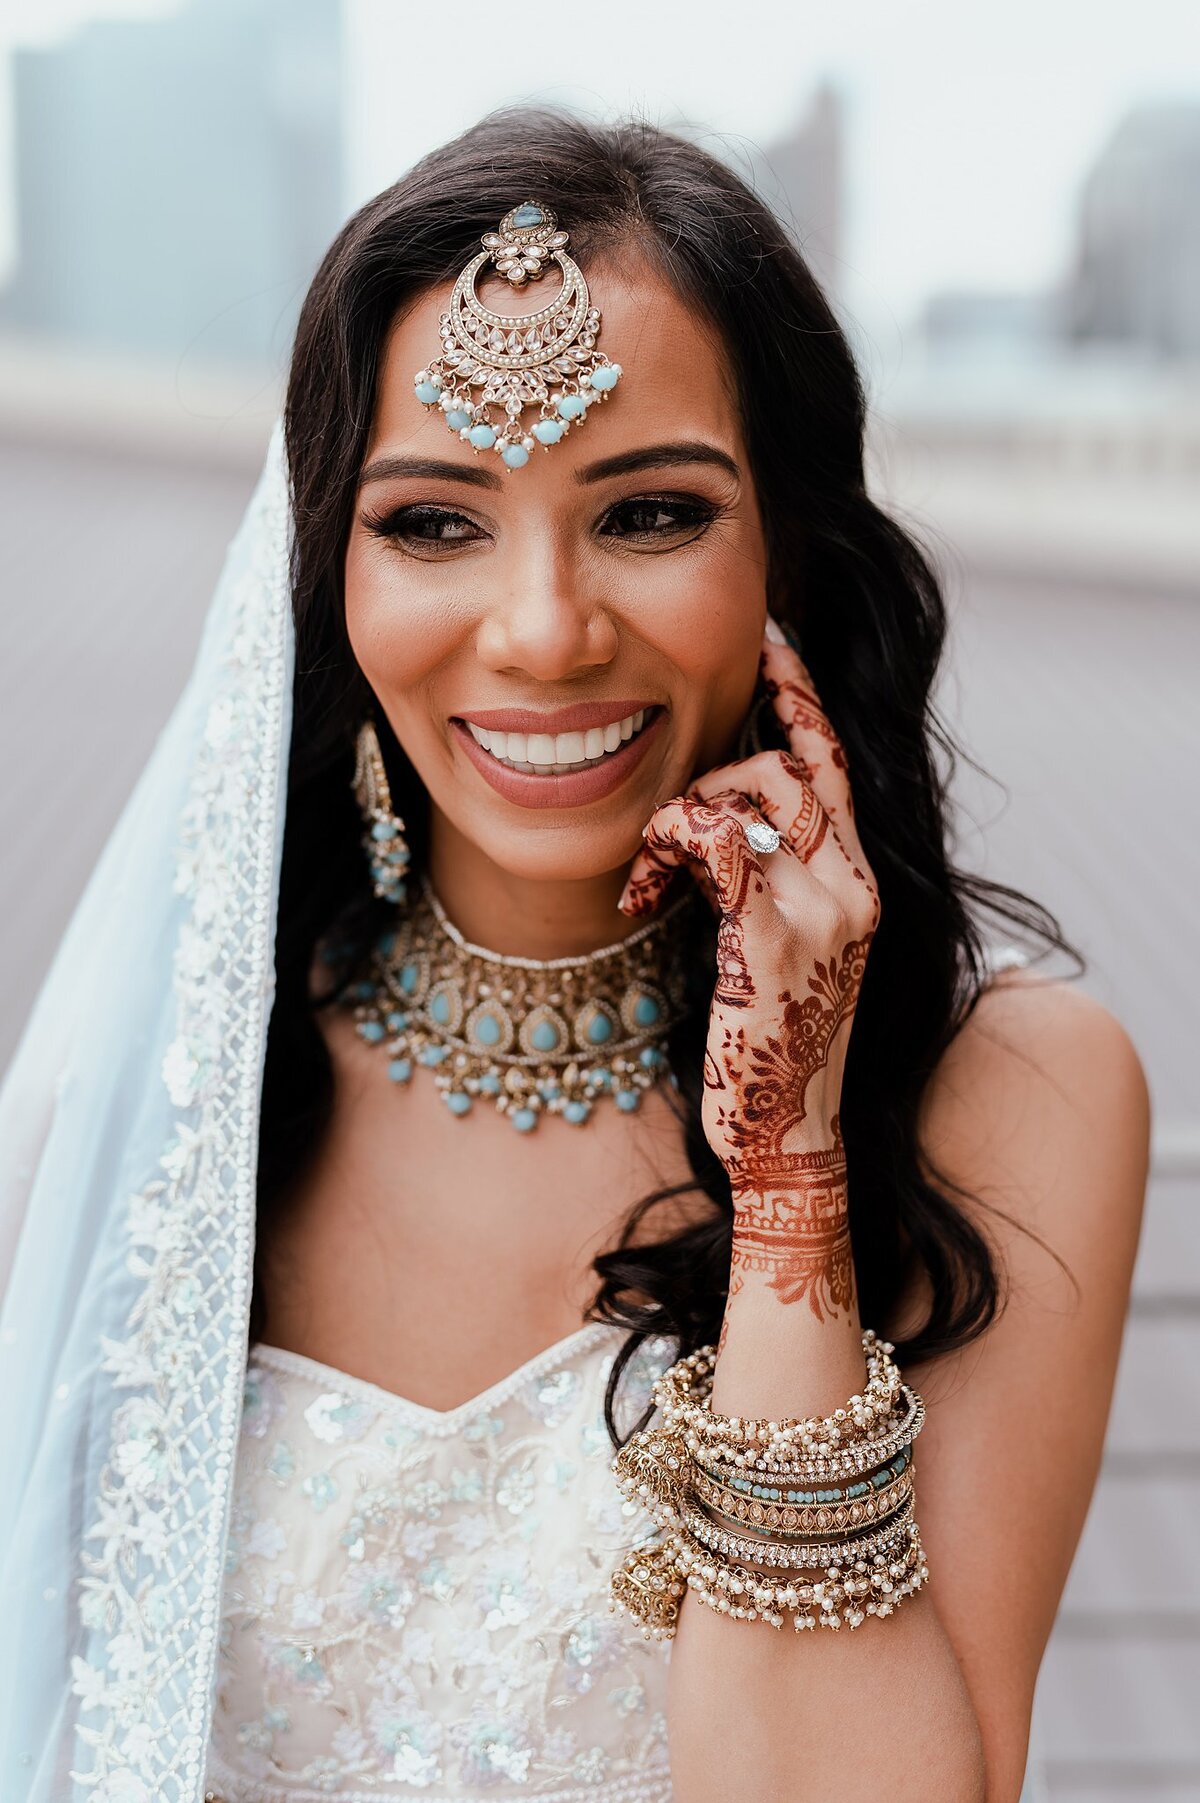 Hindu bride wearing a beaded white and light blue wedding saree shows off her blue and gold wedding jewelry and the mendhi on her hands in Nashville, TN at the Country Music Hall of Fame